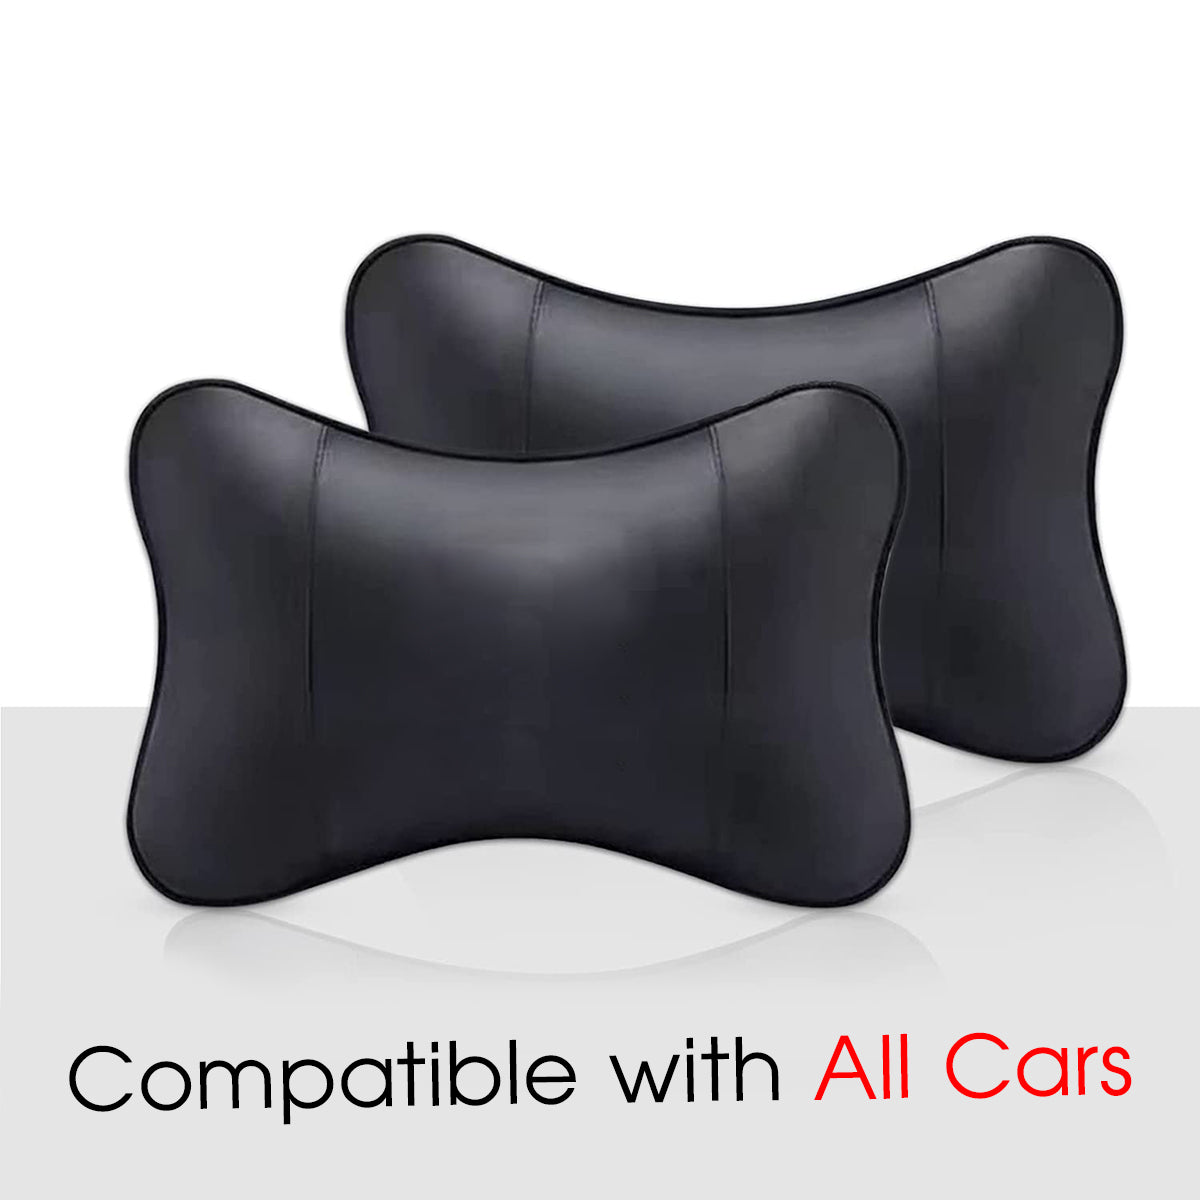 Thickened Foam Car Neck Pillow, Custom For Your Cars, Soft Leather Headrest (2 Pieces) for Driving Home Office, Car Accessories UE13990